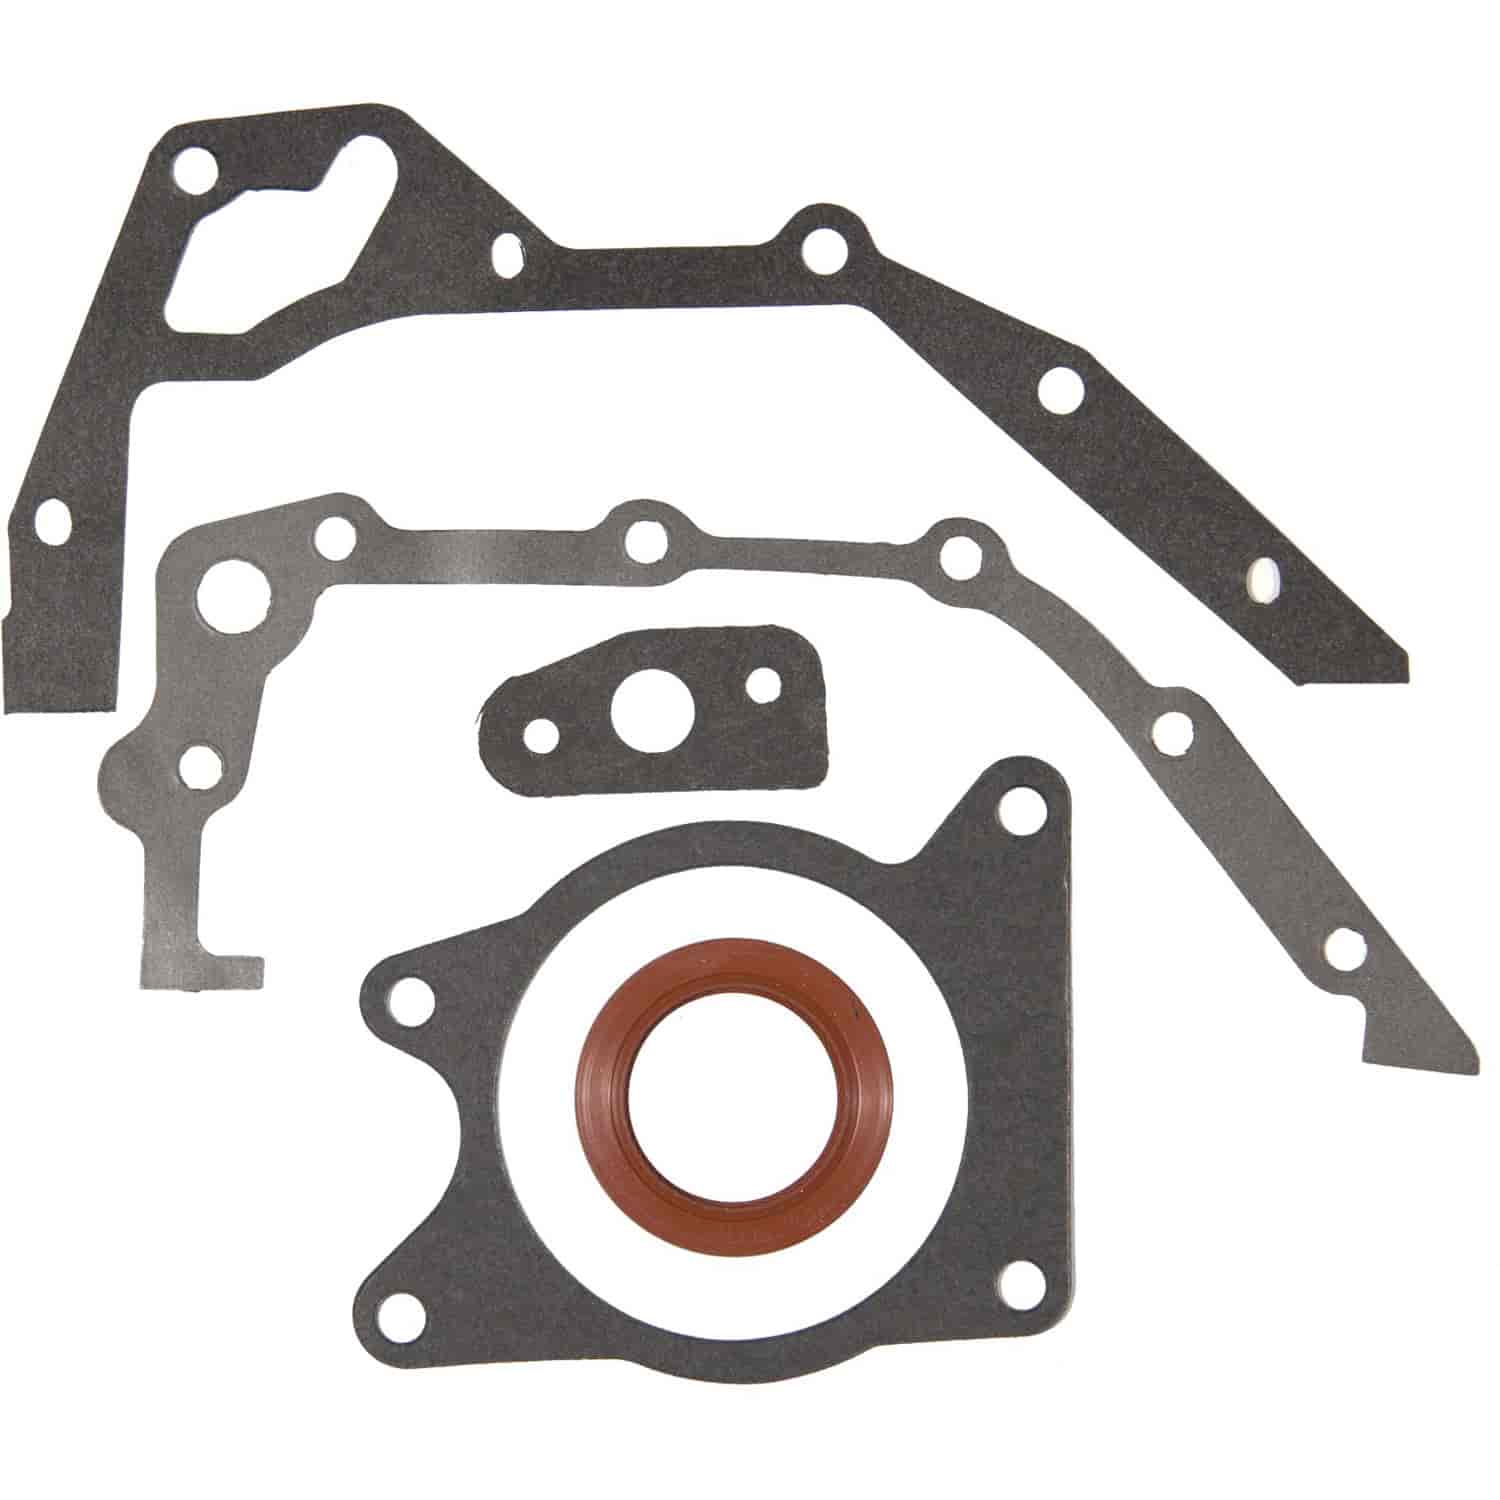 Timing Cover Set Ford-Pass Merc 98 1.6L 116